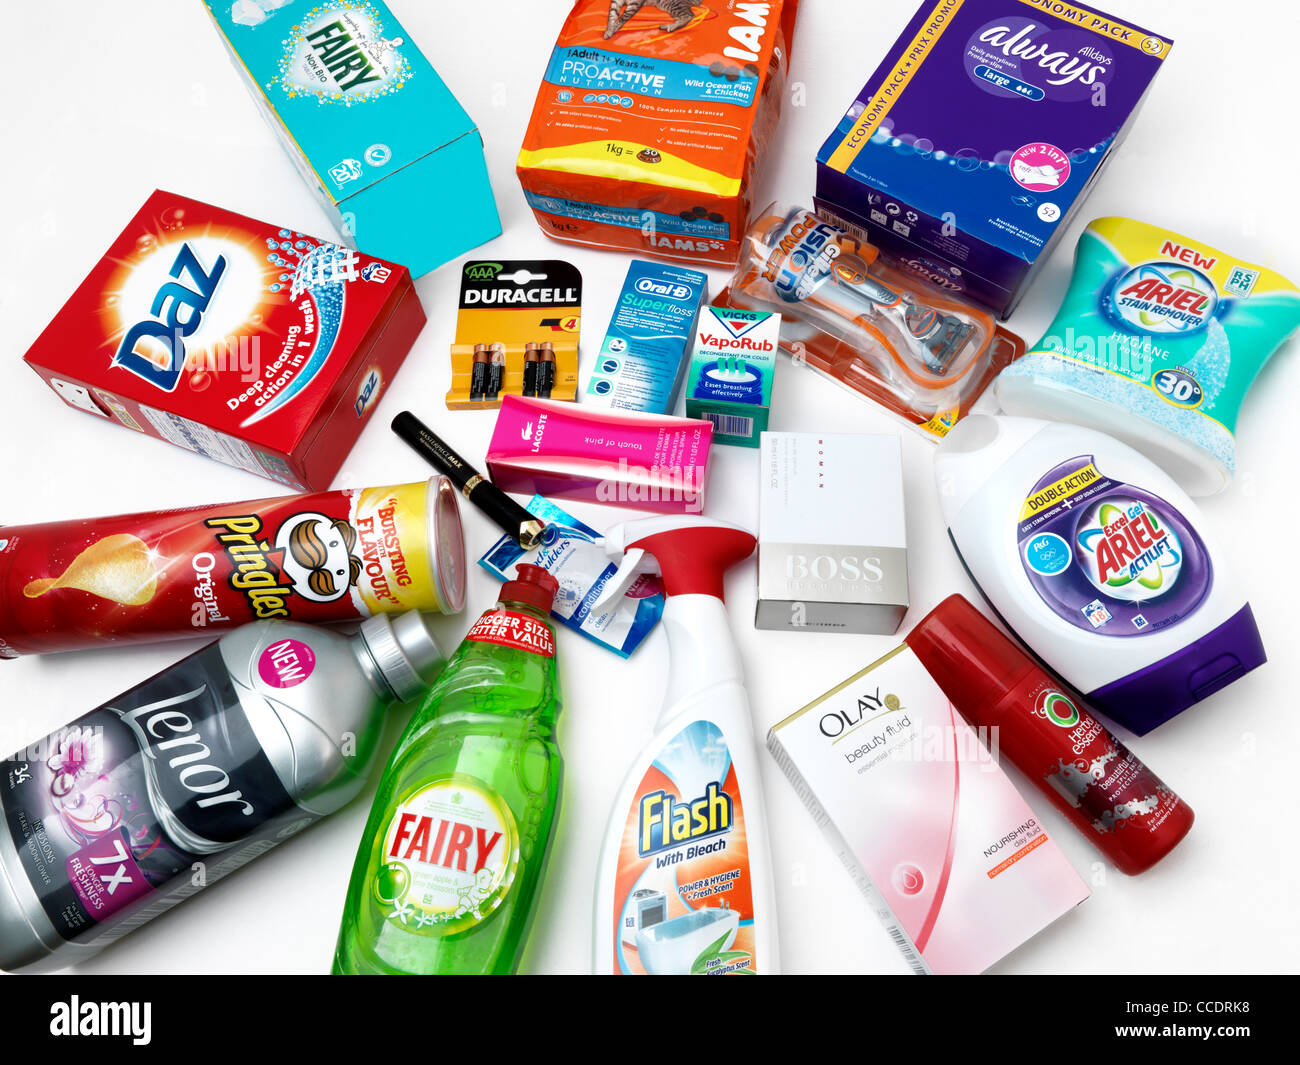 A Collection Of Procter And Gamble Products Stock Photo - Alamy